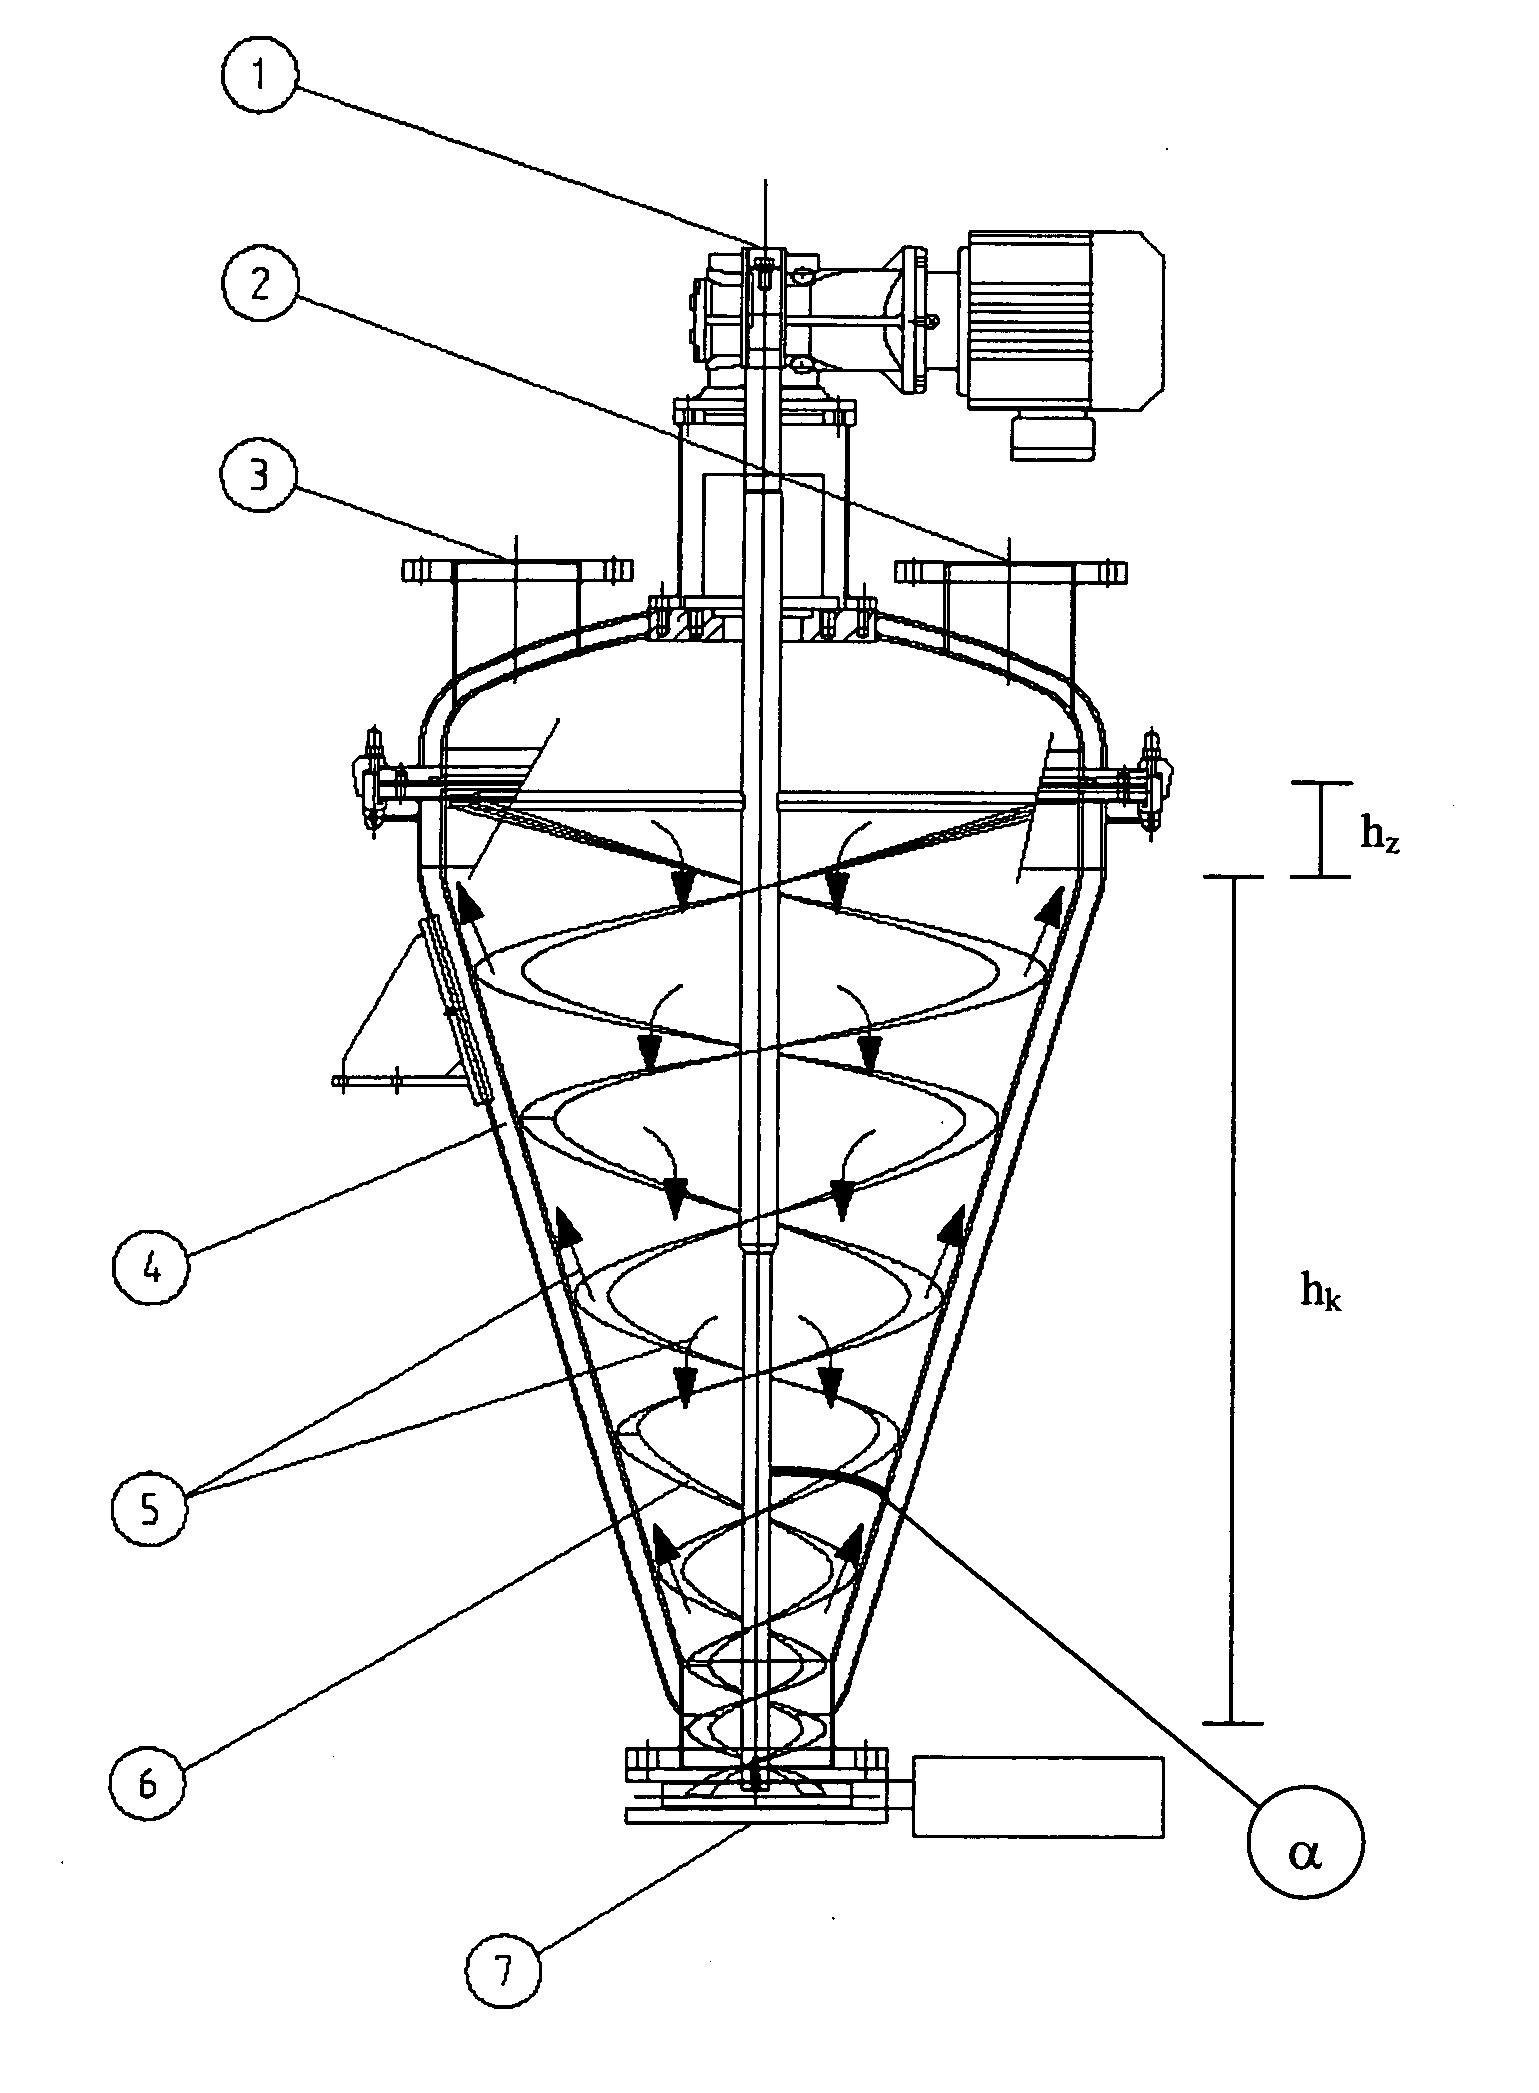 Apparatus and process for batchwise polycondensation